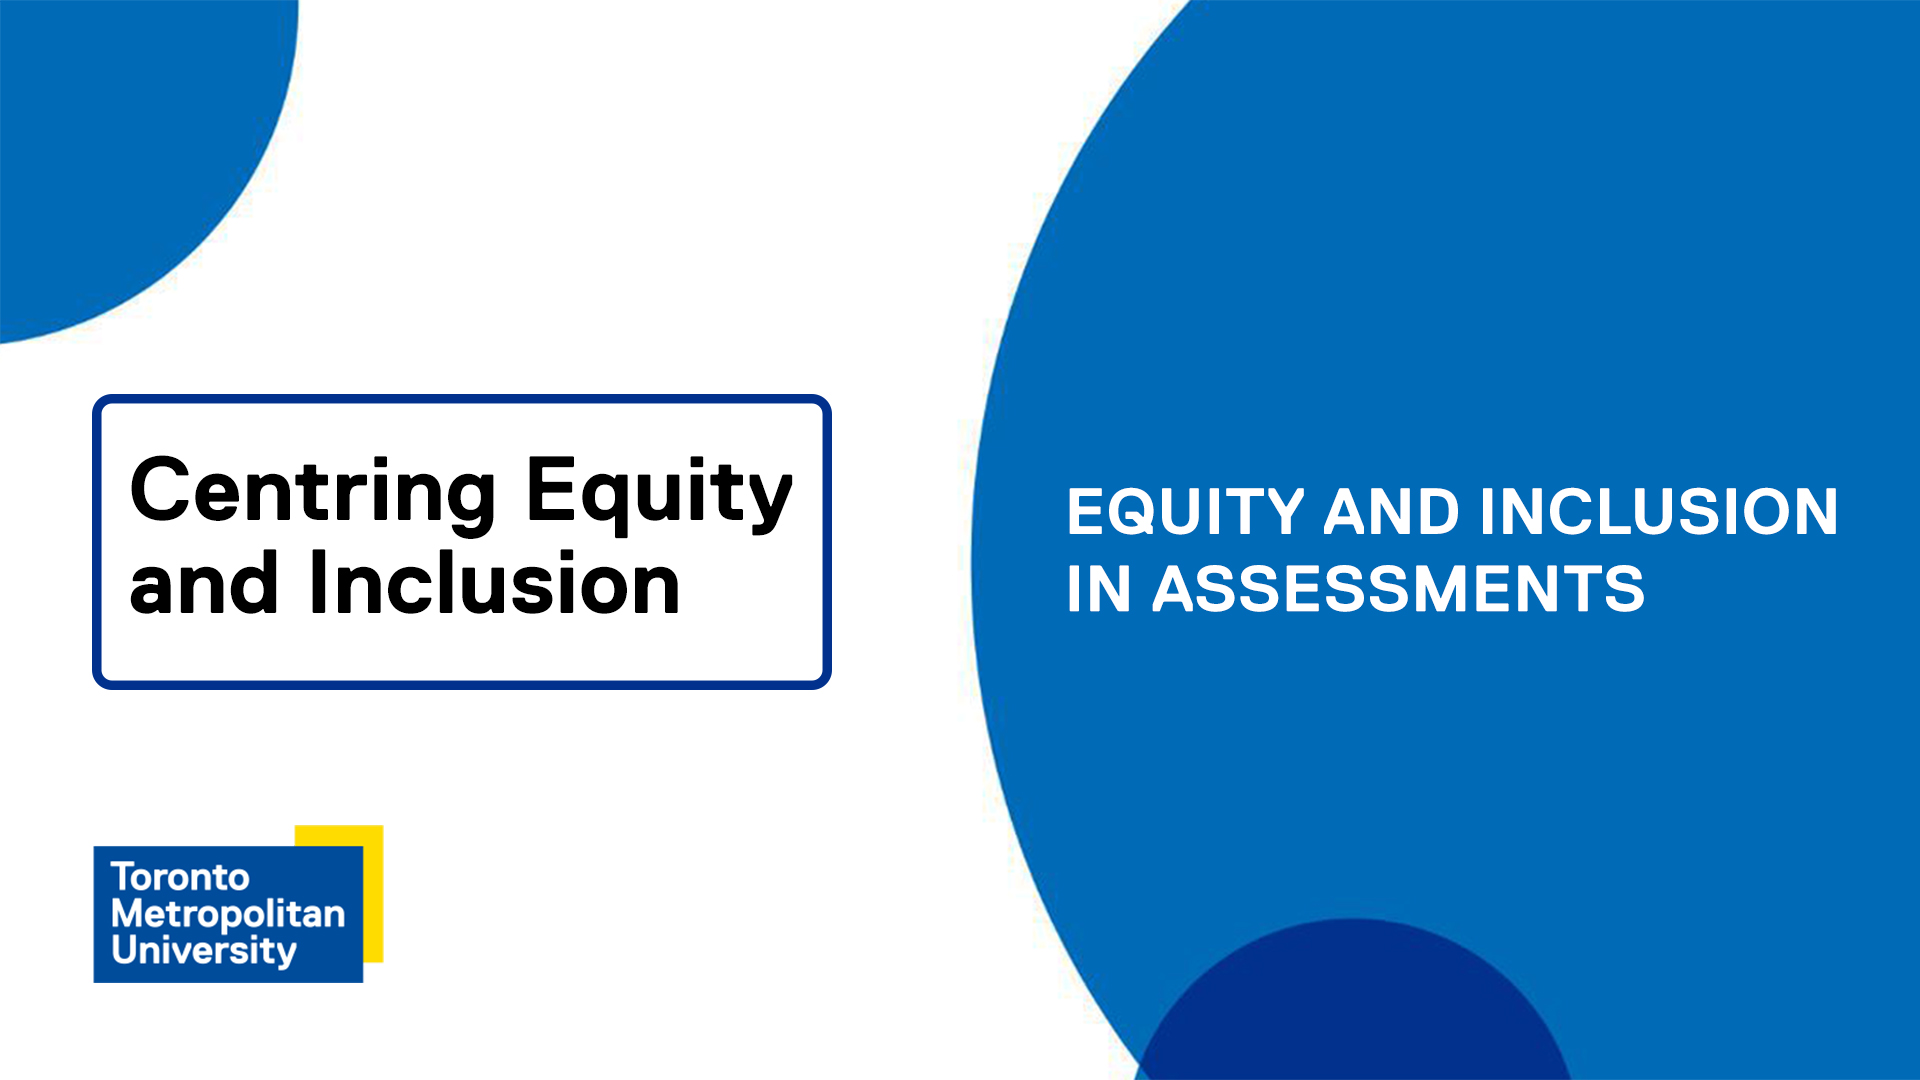 Equity and inclusion in assessments